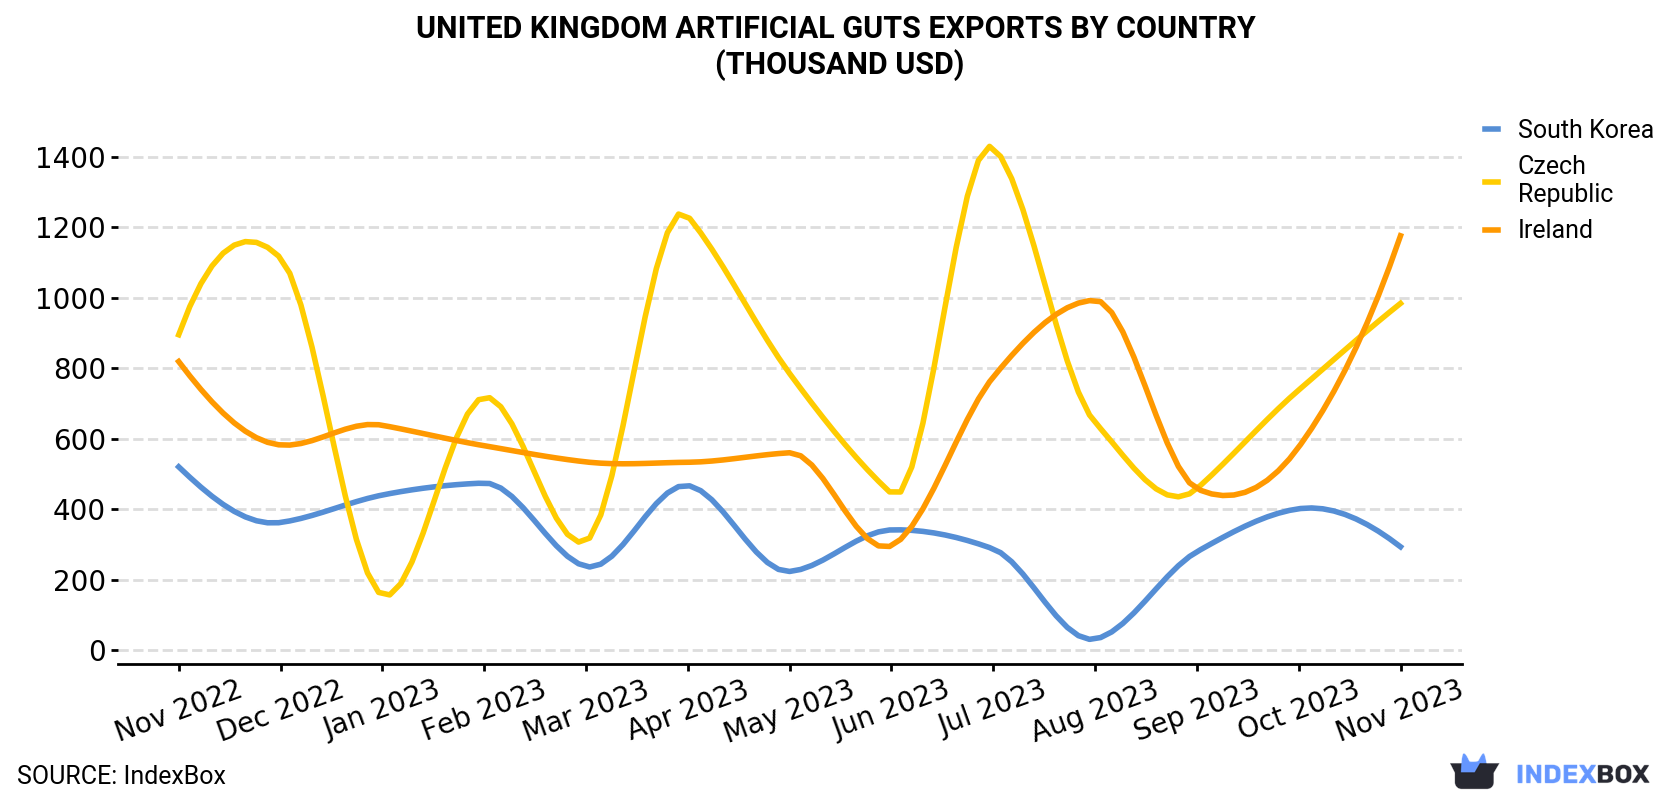 United Kingdom Artificial Guts Exports By Country (Thousand USD)